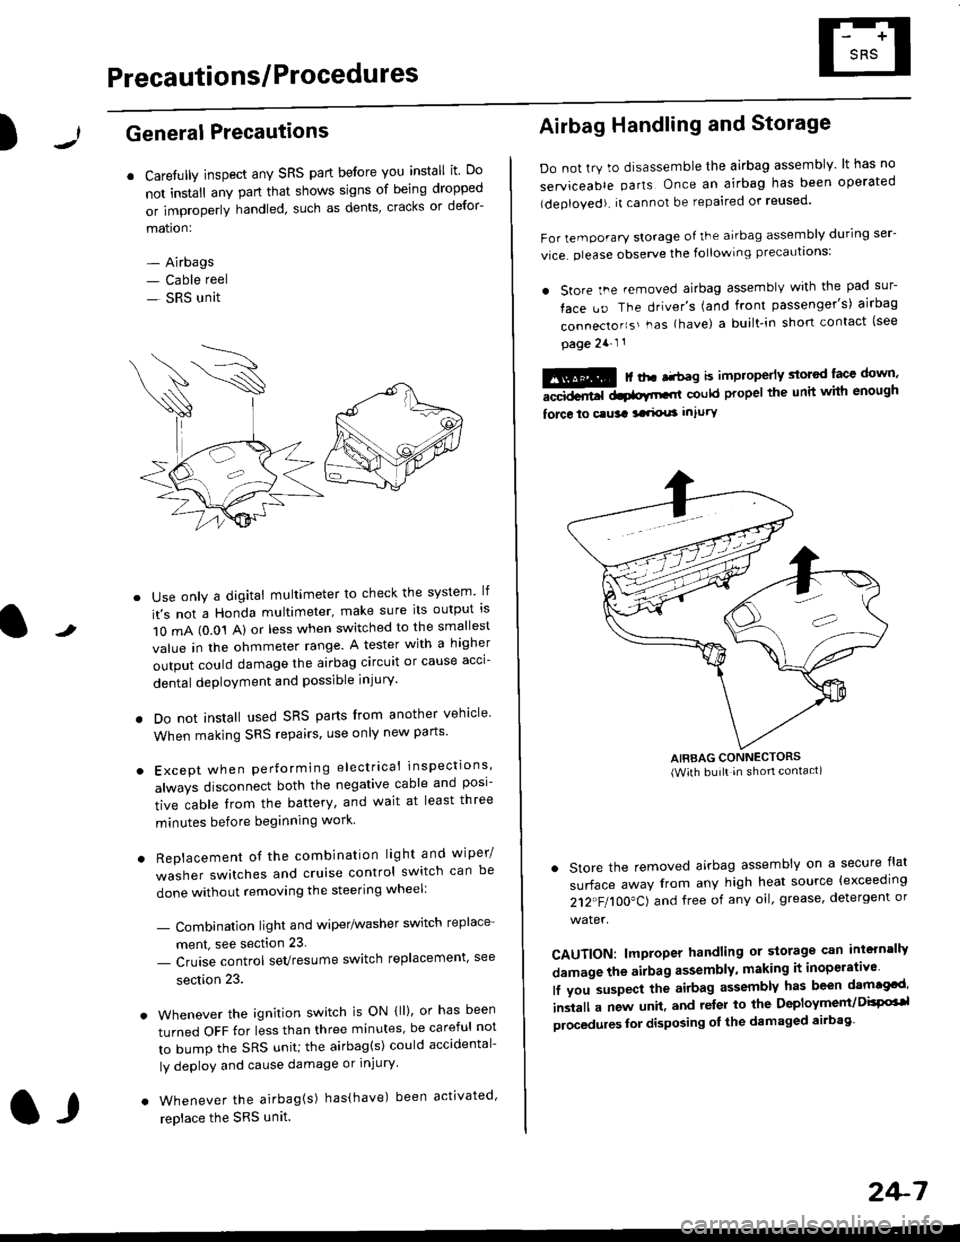 HONDA CIVIC 1997 6.G Service Manual Precautions/ Procedures
)General Precautions
r Carefully inspect any SRS part before you install it Do
not install any part that shows signs of being dropped
or improperly handled such as dents, crac